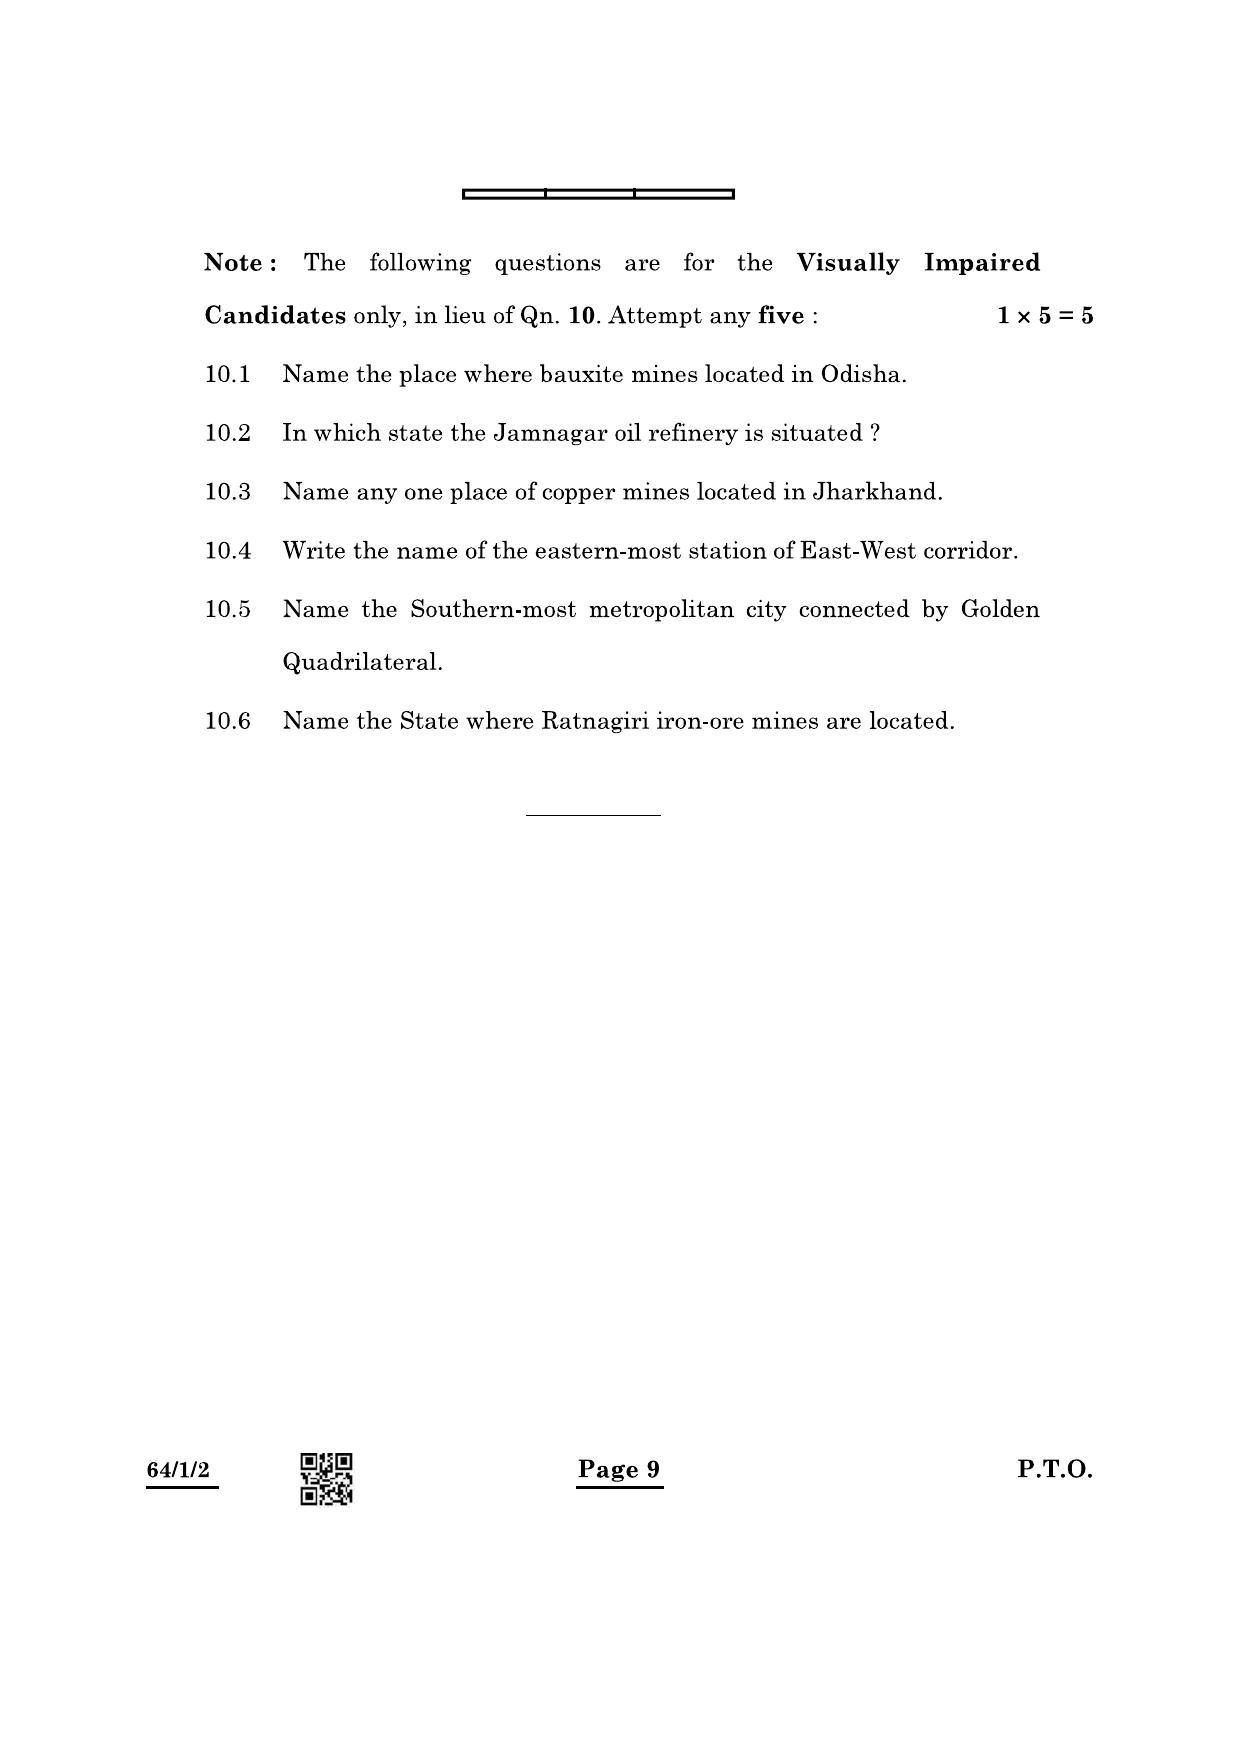 CBSE Class 12 64-1-2 Geography 2022 Question Paper - Page 9